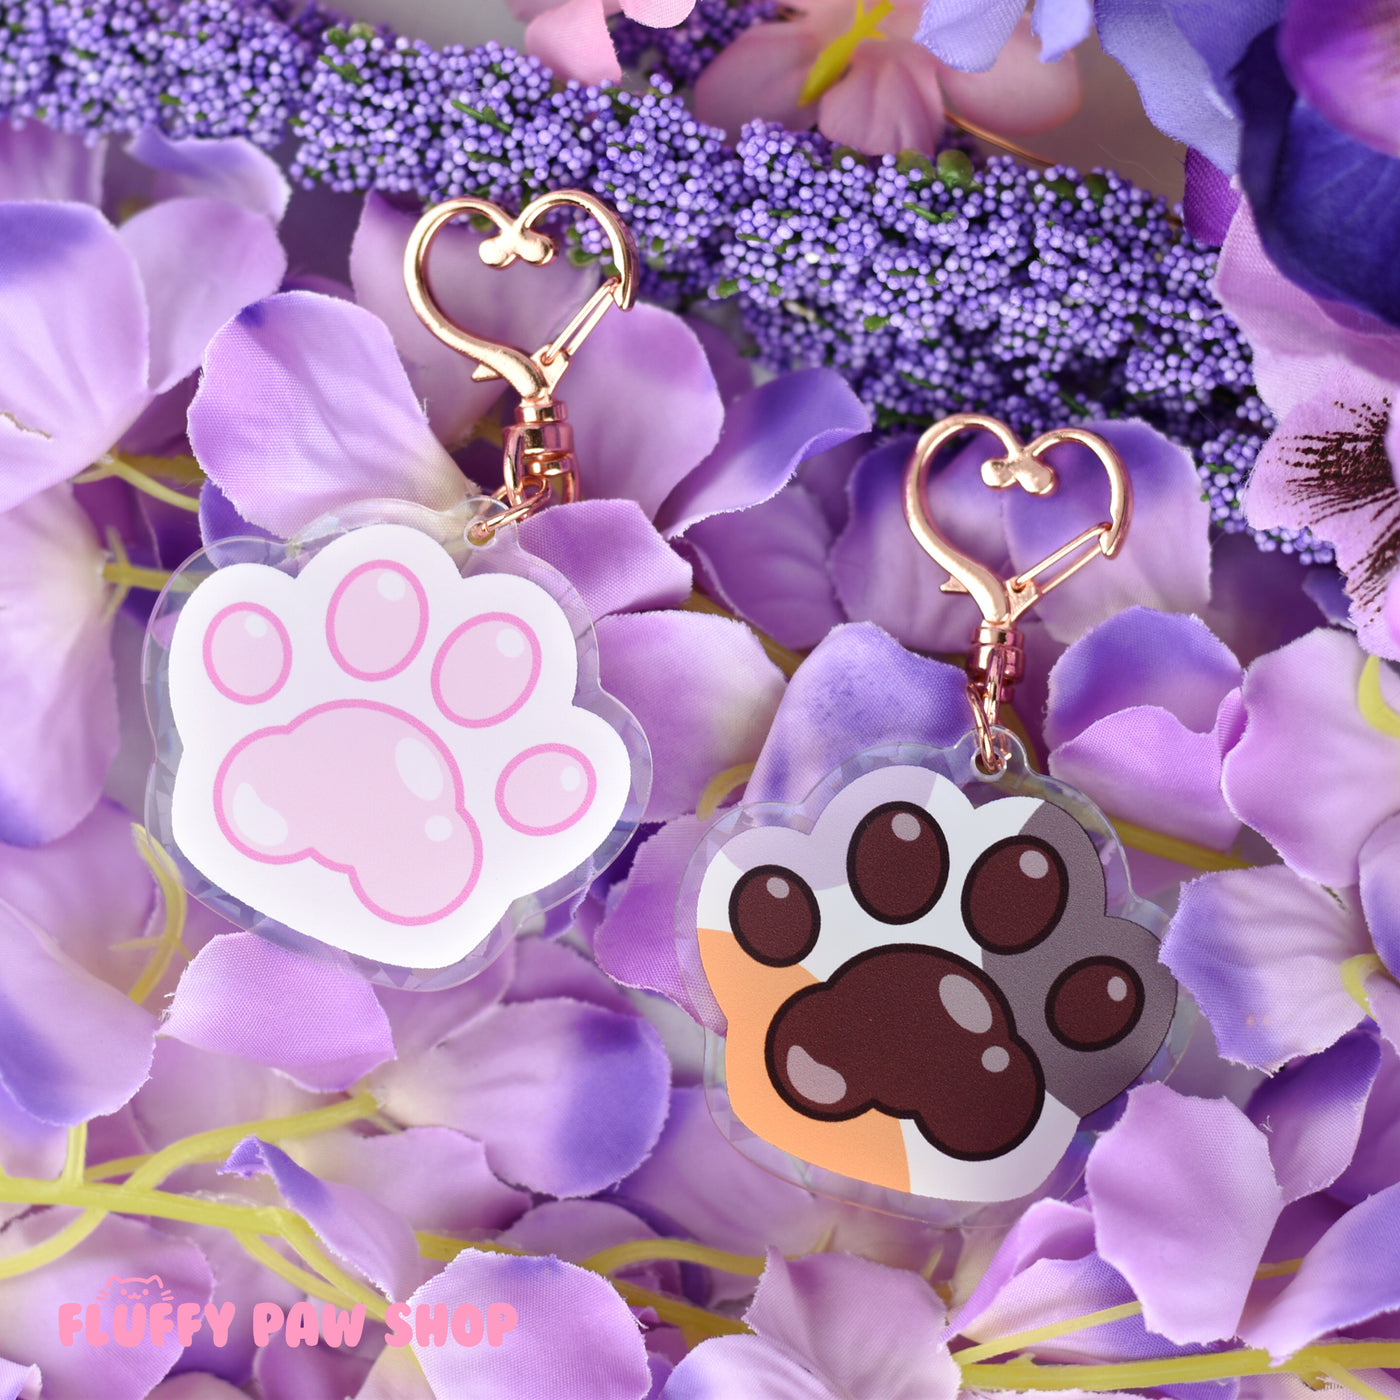 Cat Paw Acrylic Keychain - Fluffy Paw Shop - Petplay BDSM DDLG Kitten Play Tail Cosplay Furry